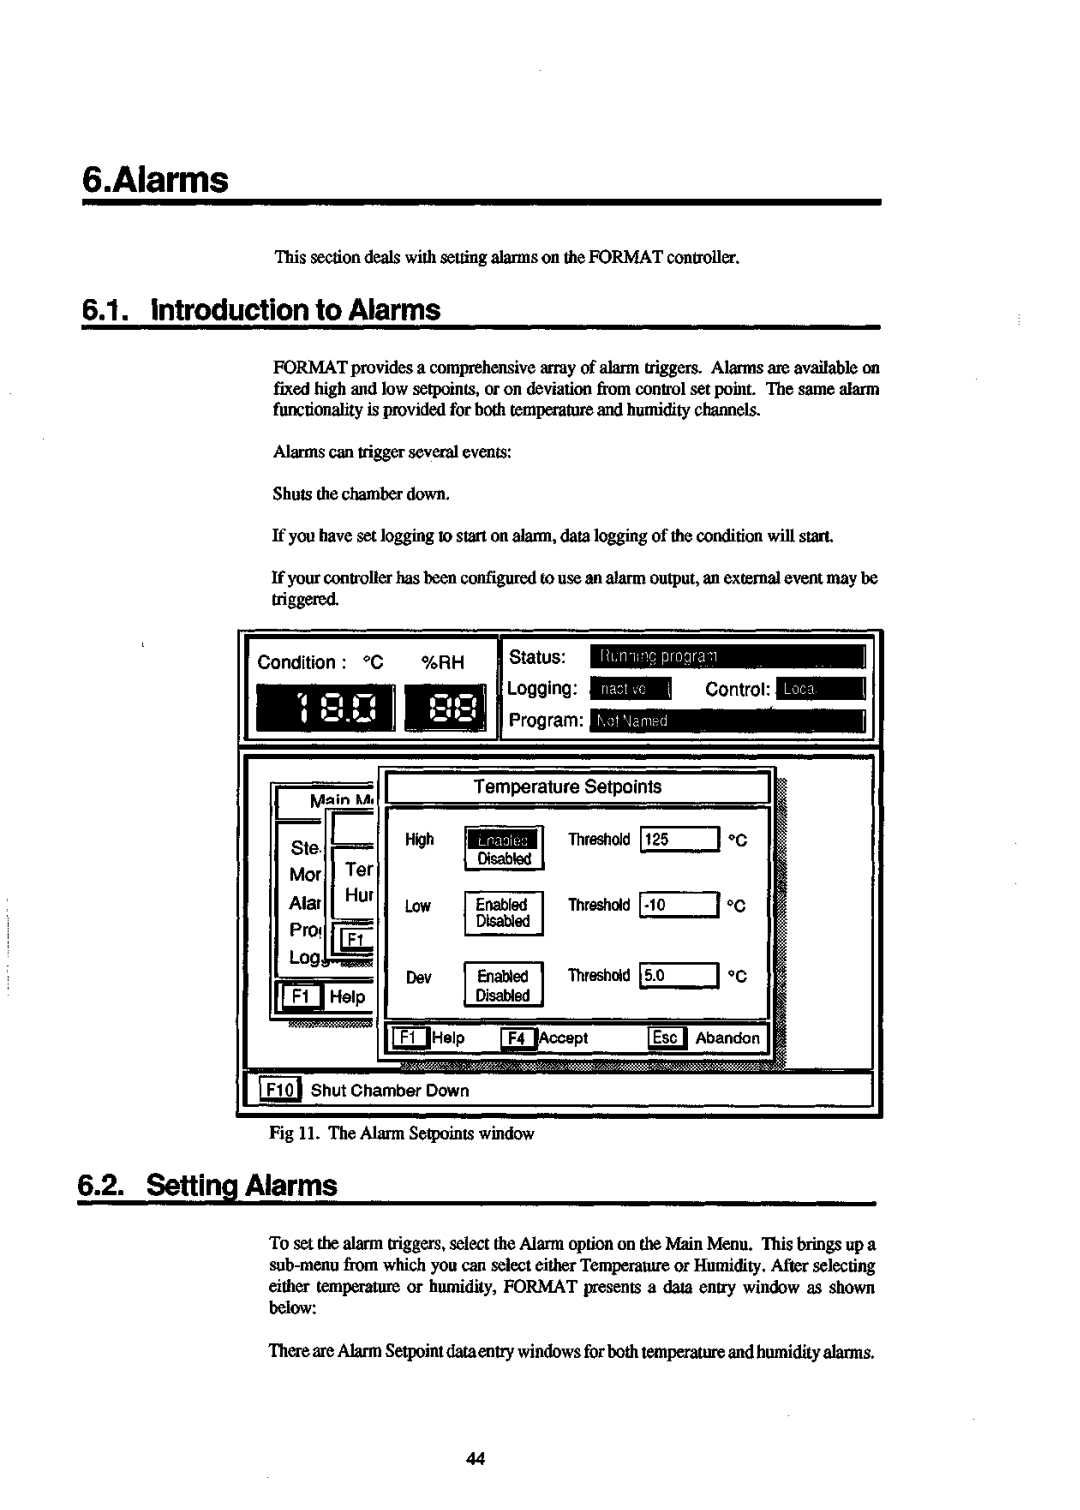 Sanyo 550 instruction manual Introduction to Alarms, Setting Alarms 